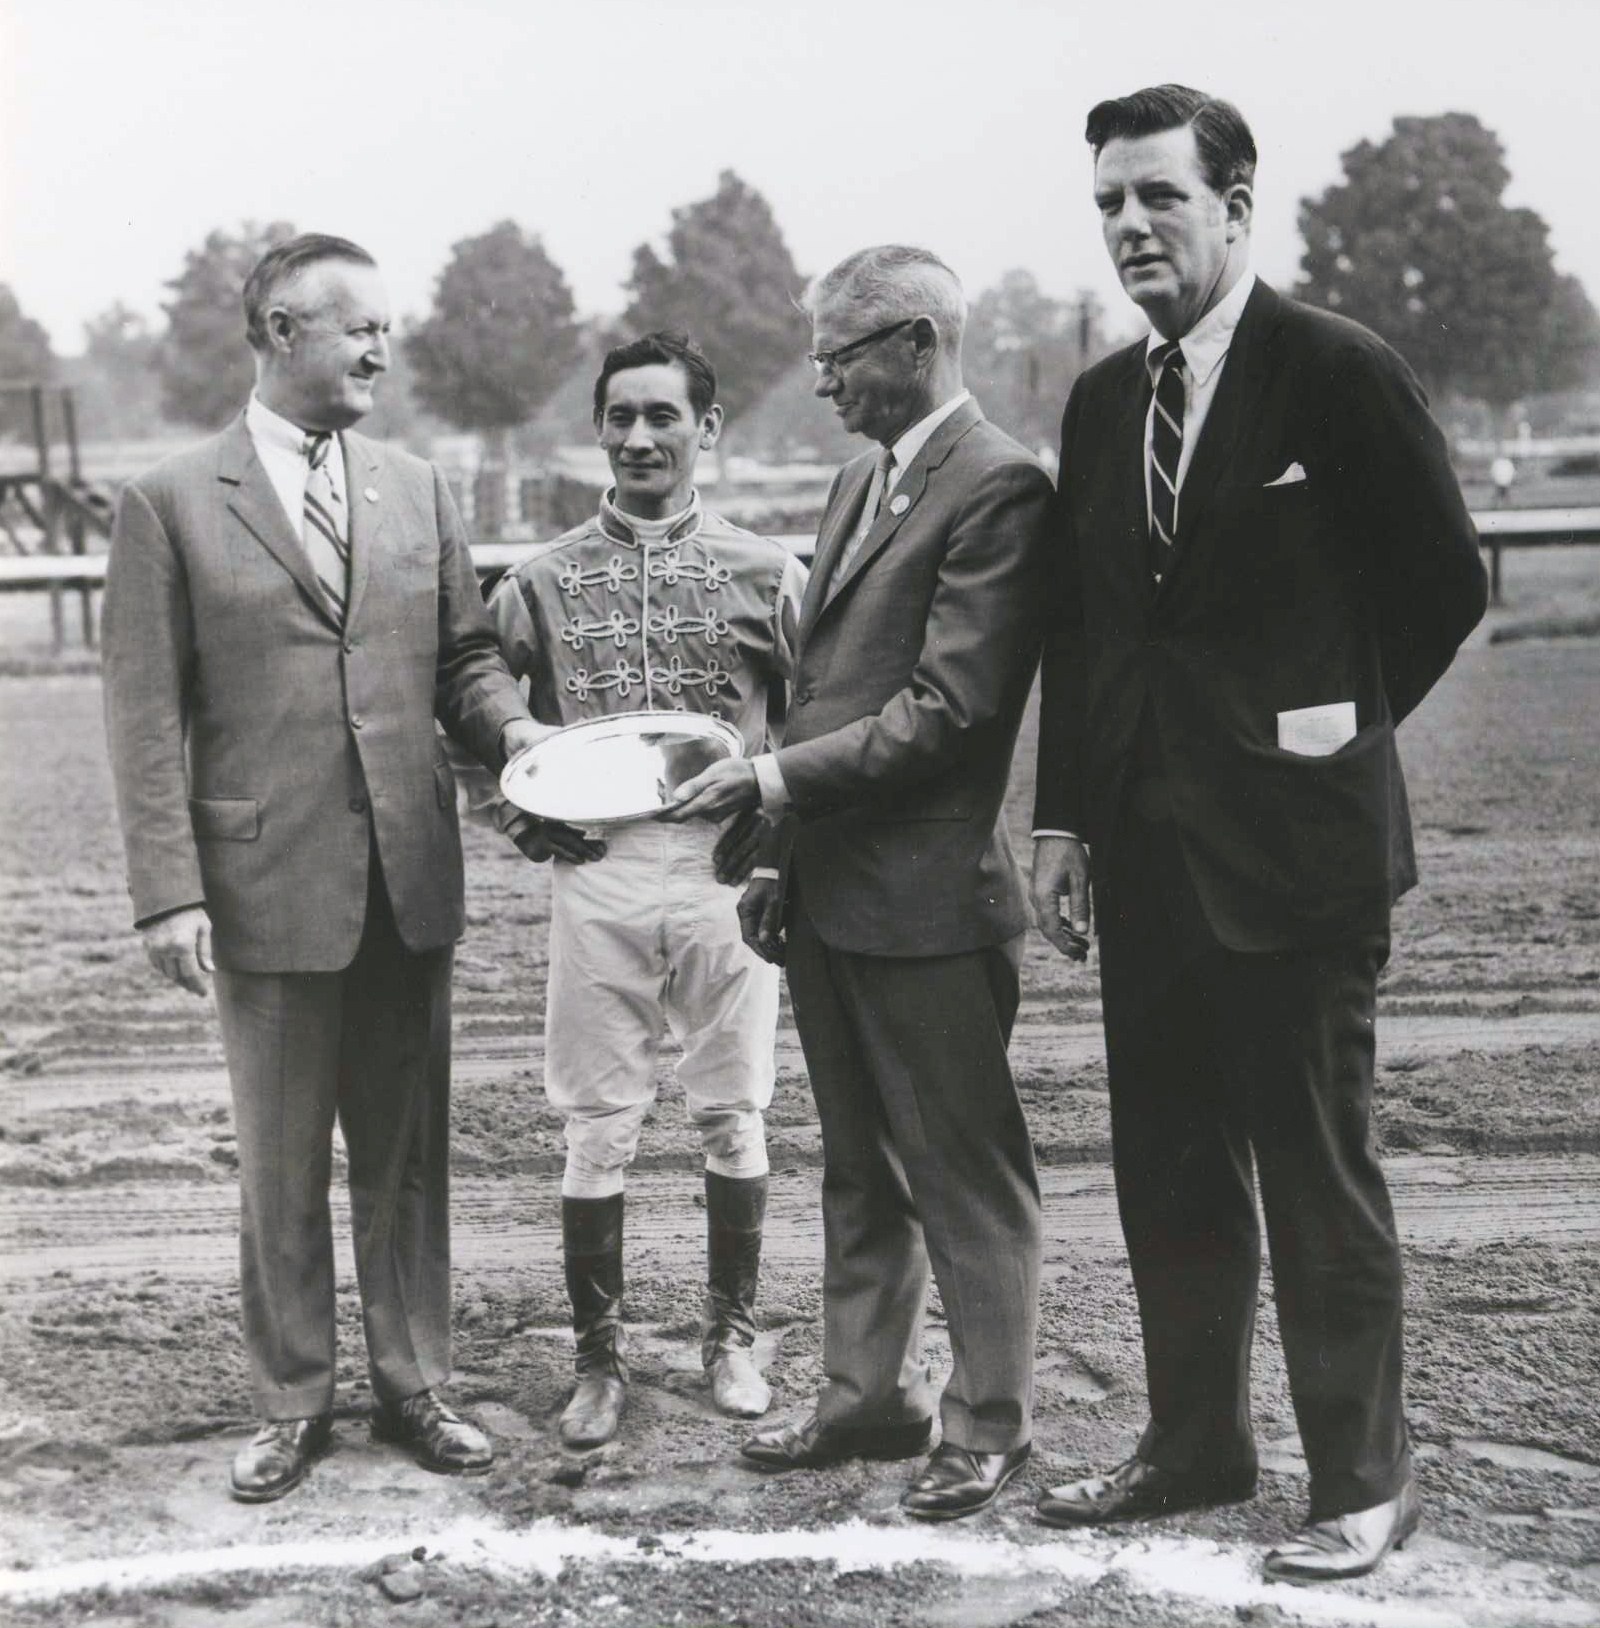 From left, Paul Mellon, Braulio Baeza, the Honorable William L. Pfeiffer, and Elliott Burch at Saratoga for winner's circle presentation after Arts and Letters' Jim Dandy Stakes victory, Aug. 8, 1969 (Museum Collection)